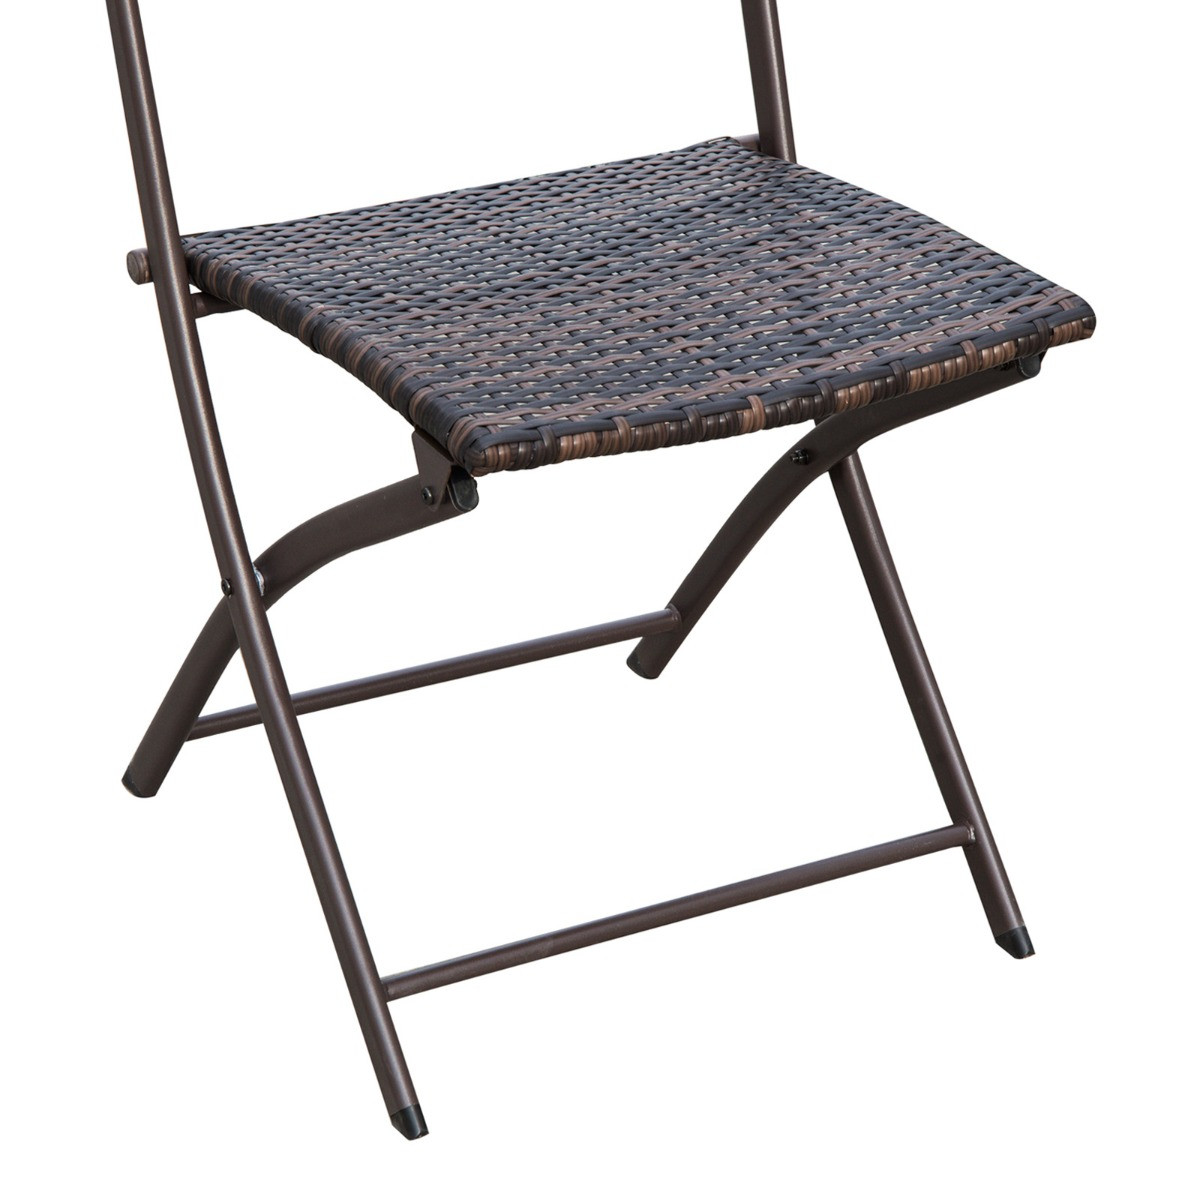 Outsunny Rattan Wicker Bistro Foldable Table Set, 3 Piece - Brown